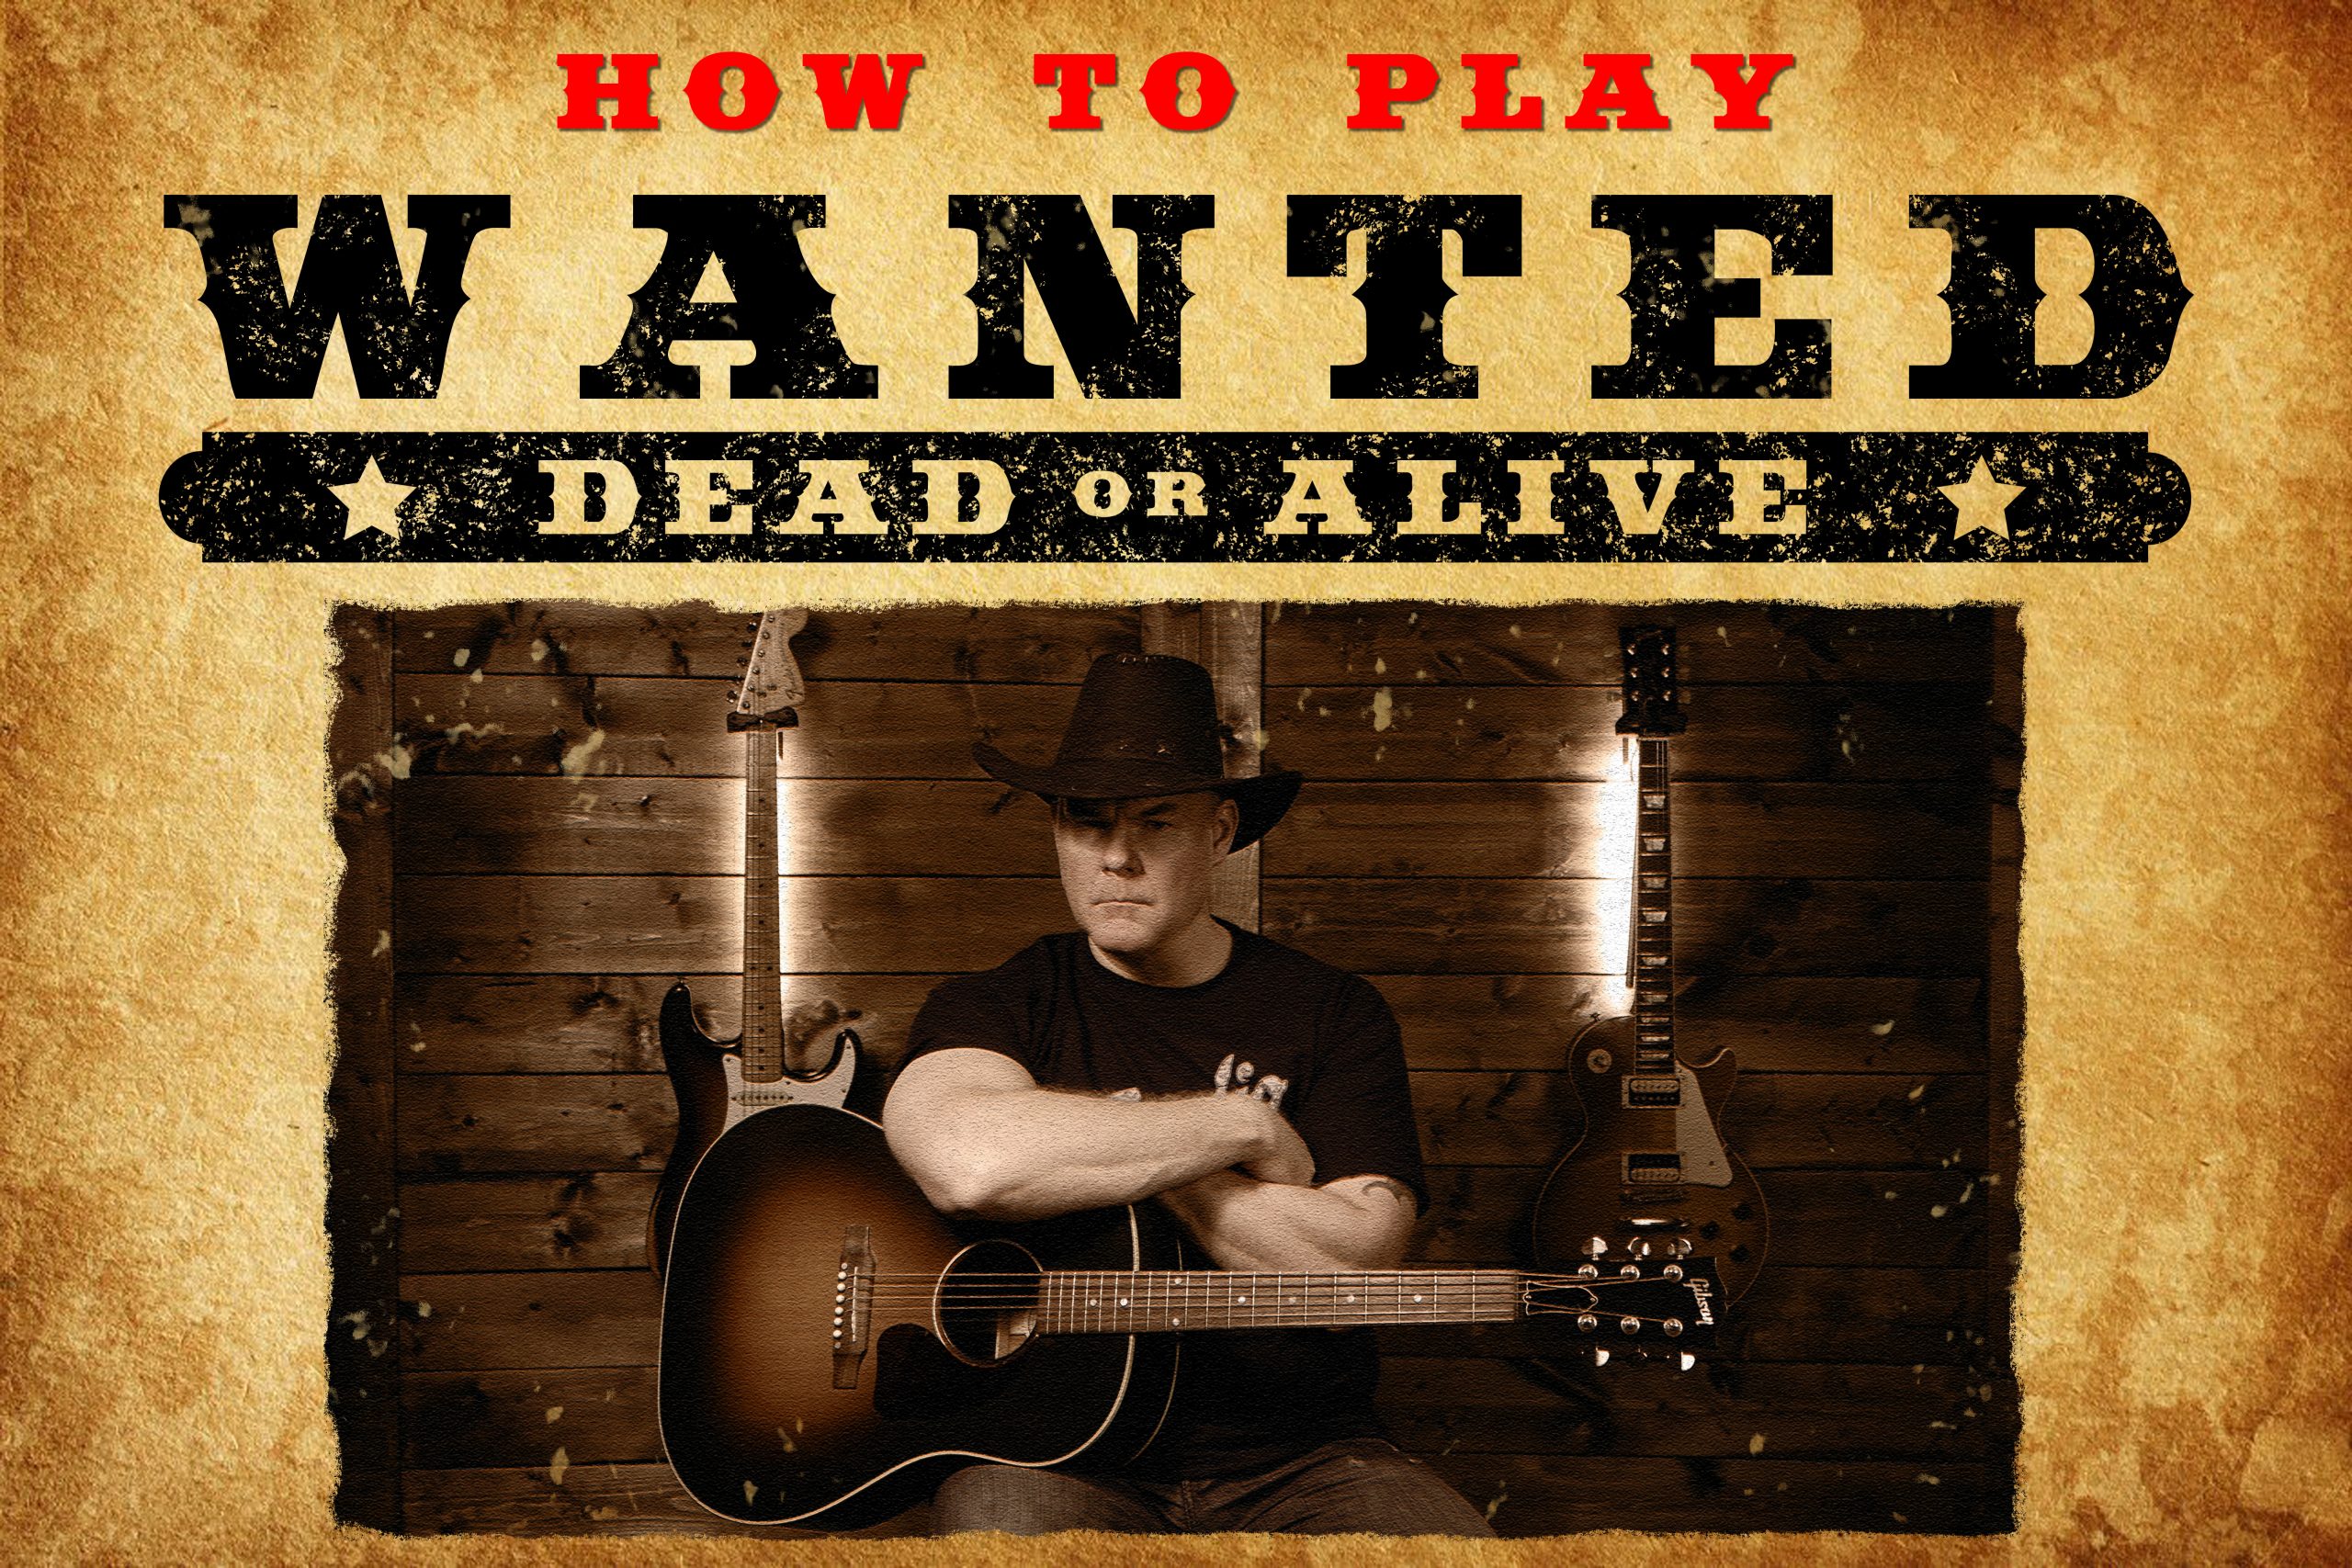 Dead or alive Acoustic